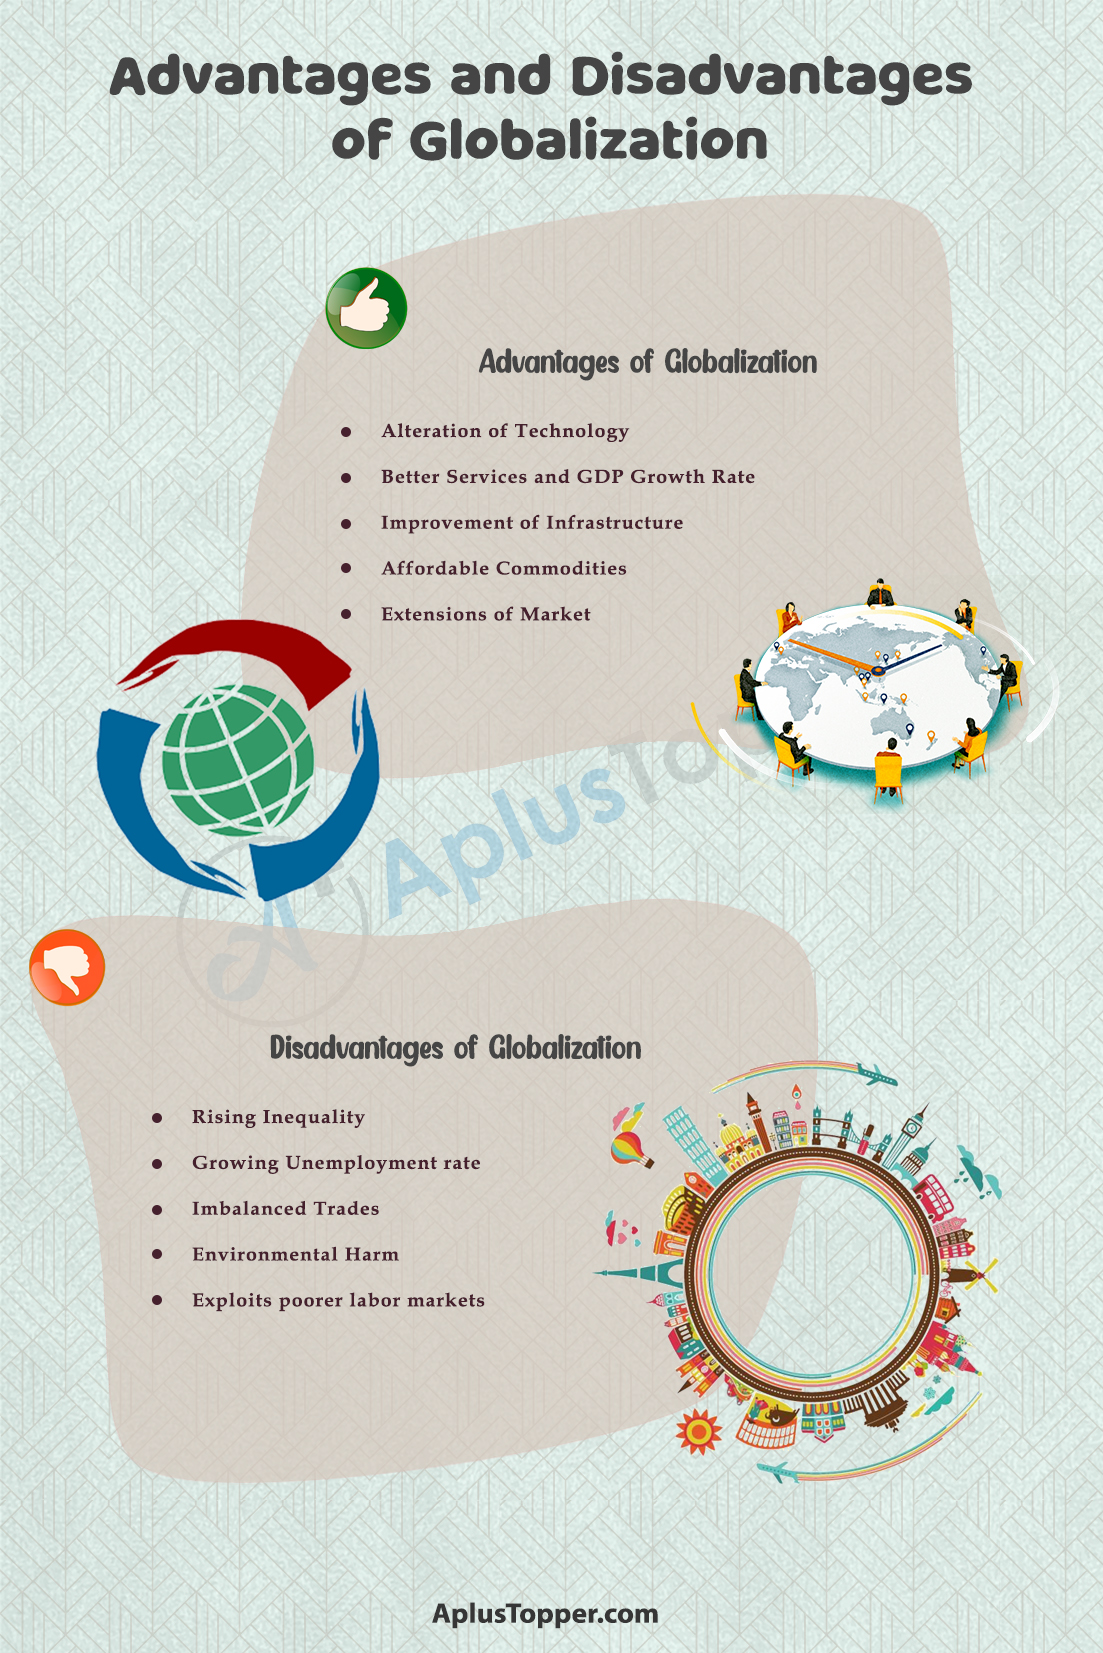 Advantages and Disadvantages of Globalization 2